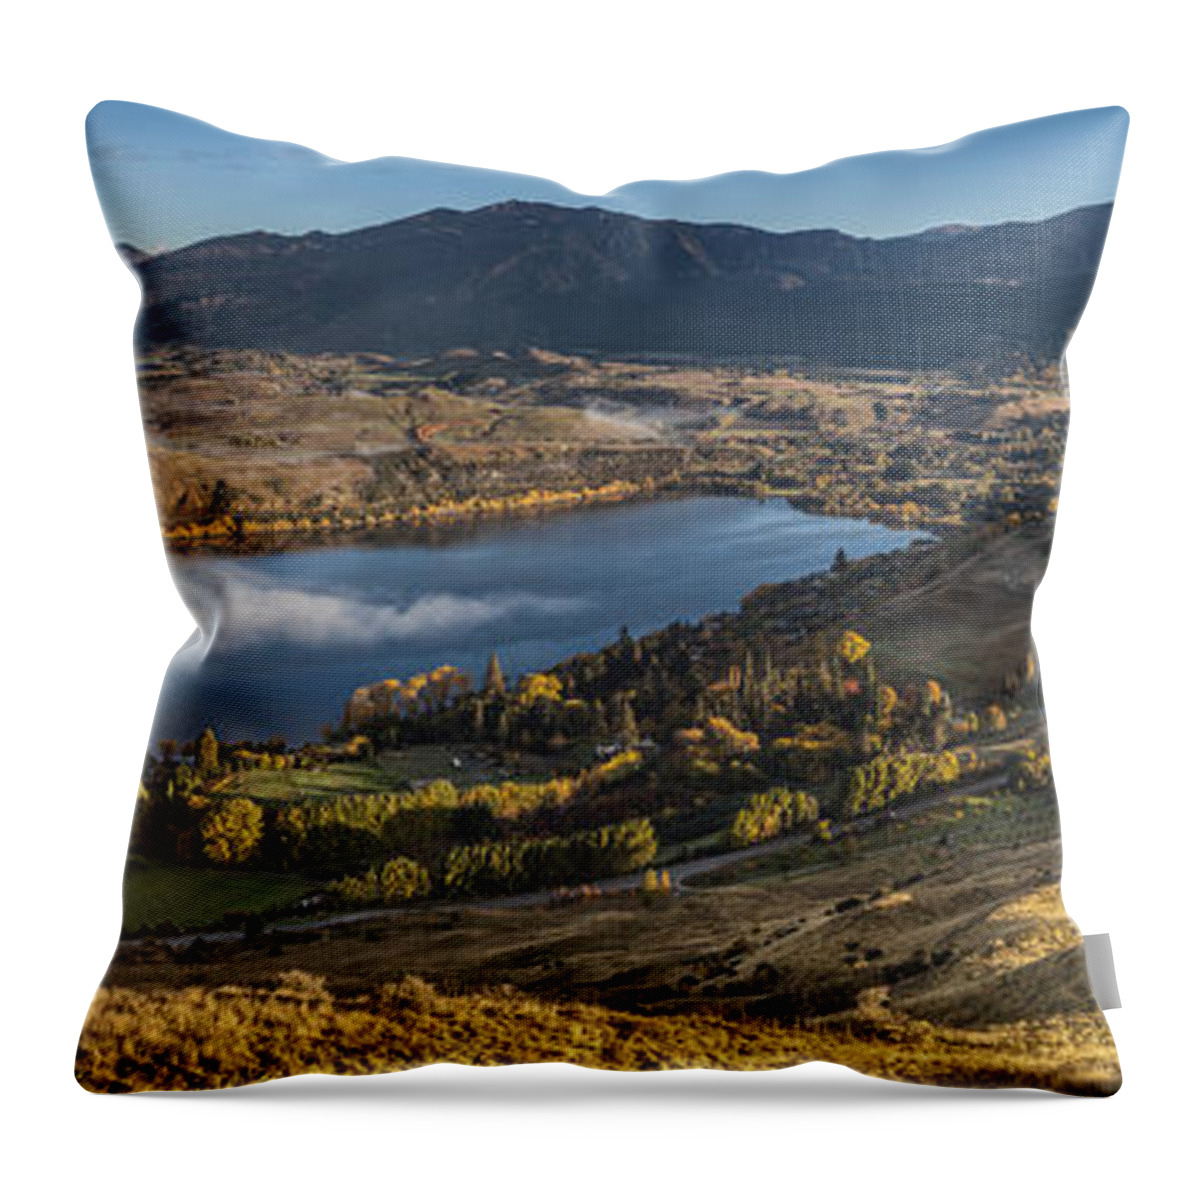 colin Monteath Hedgehog House Throw Pillow featuring the photograph Valley And Lake At Dawn Arrowtown Otago by Colin Monteath, Hedgehog House